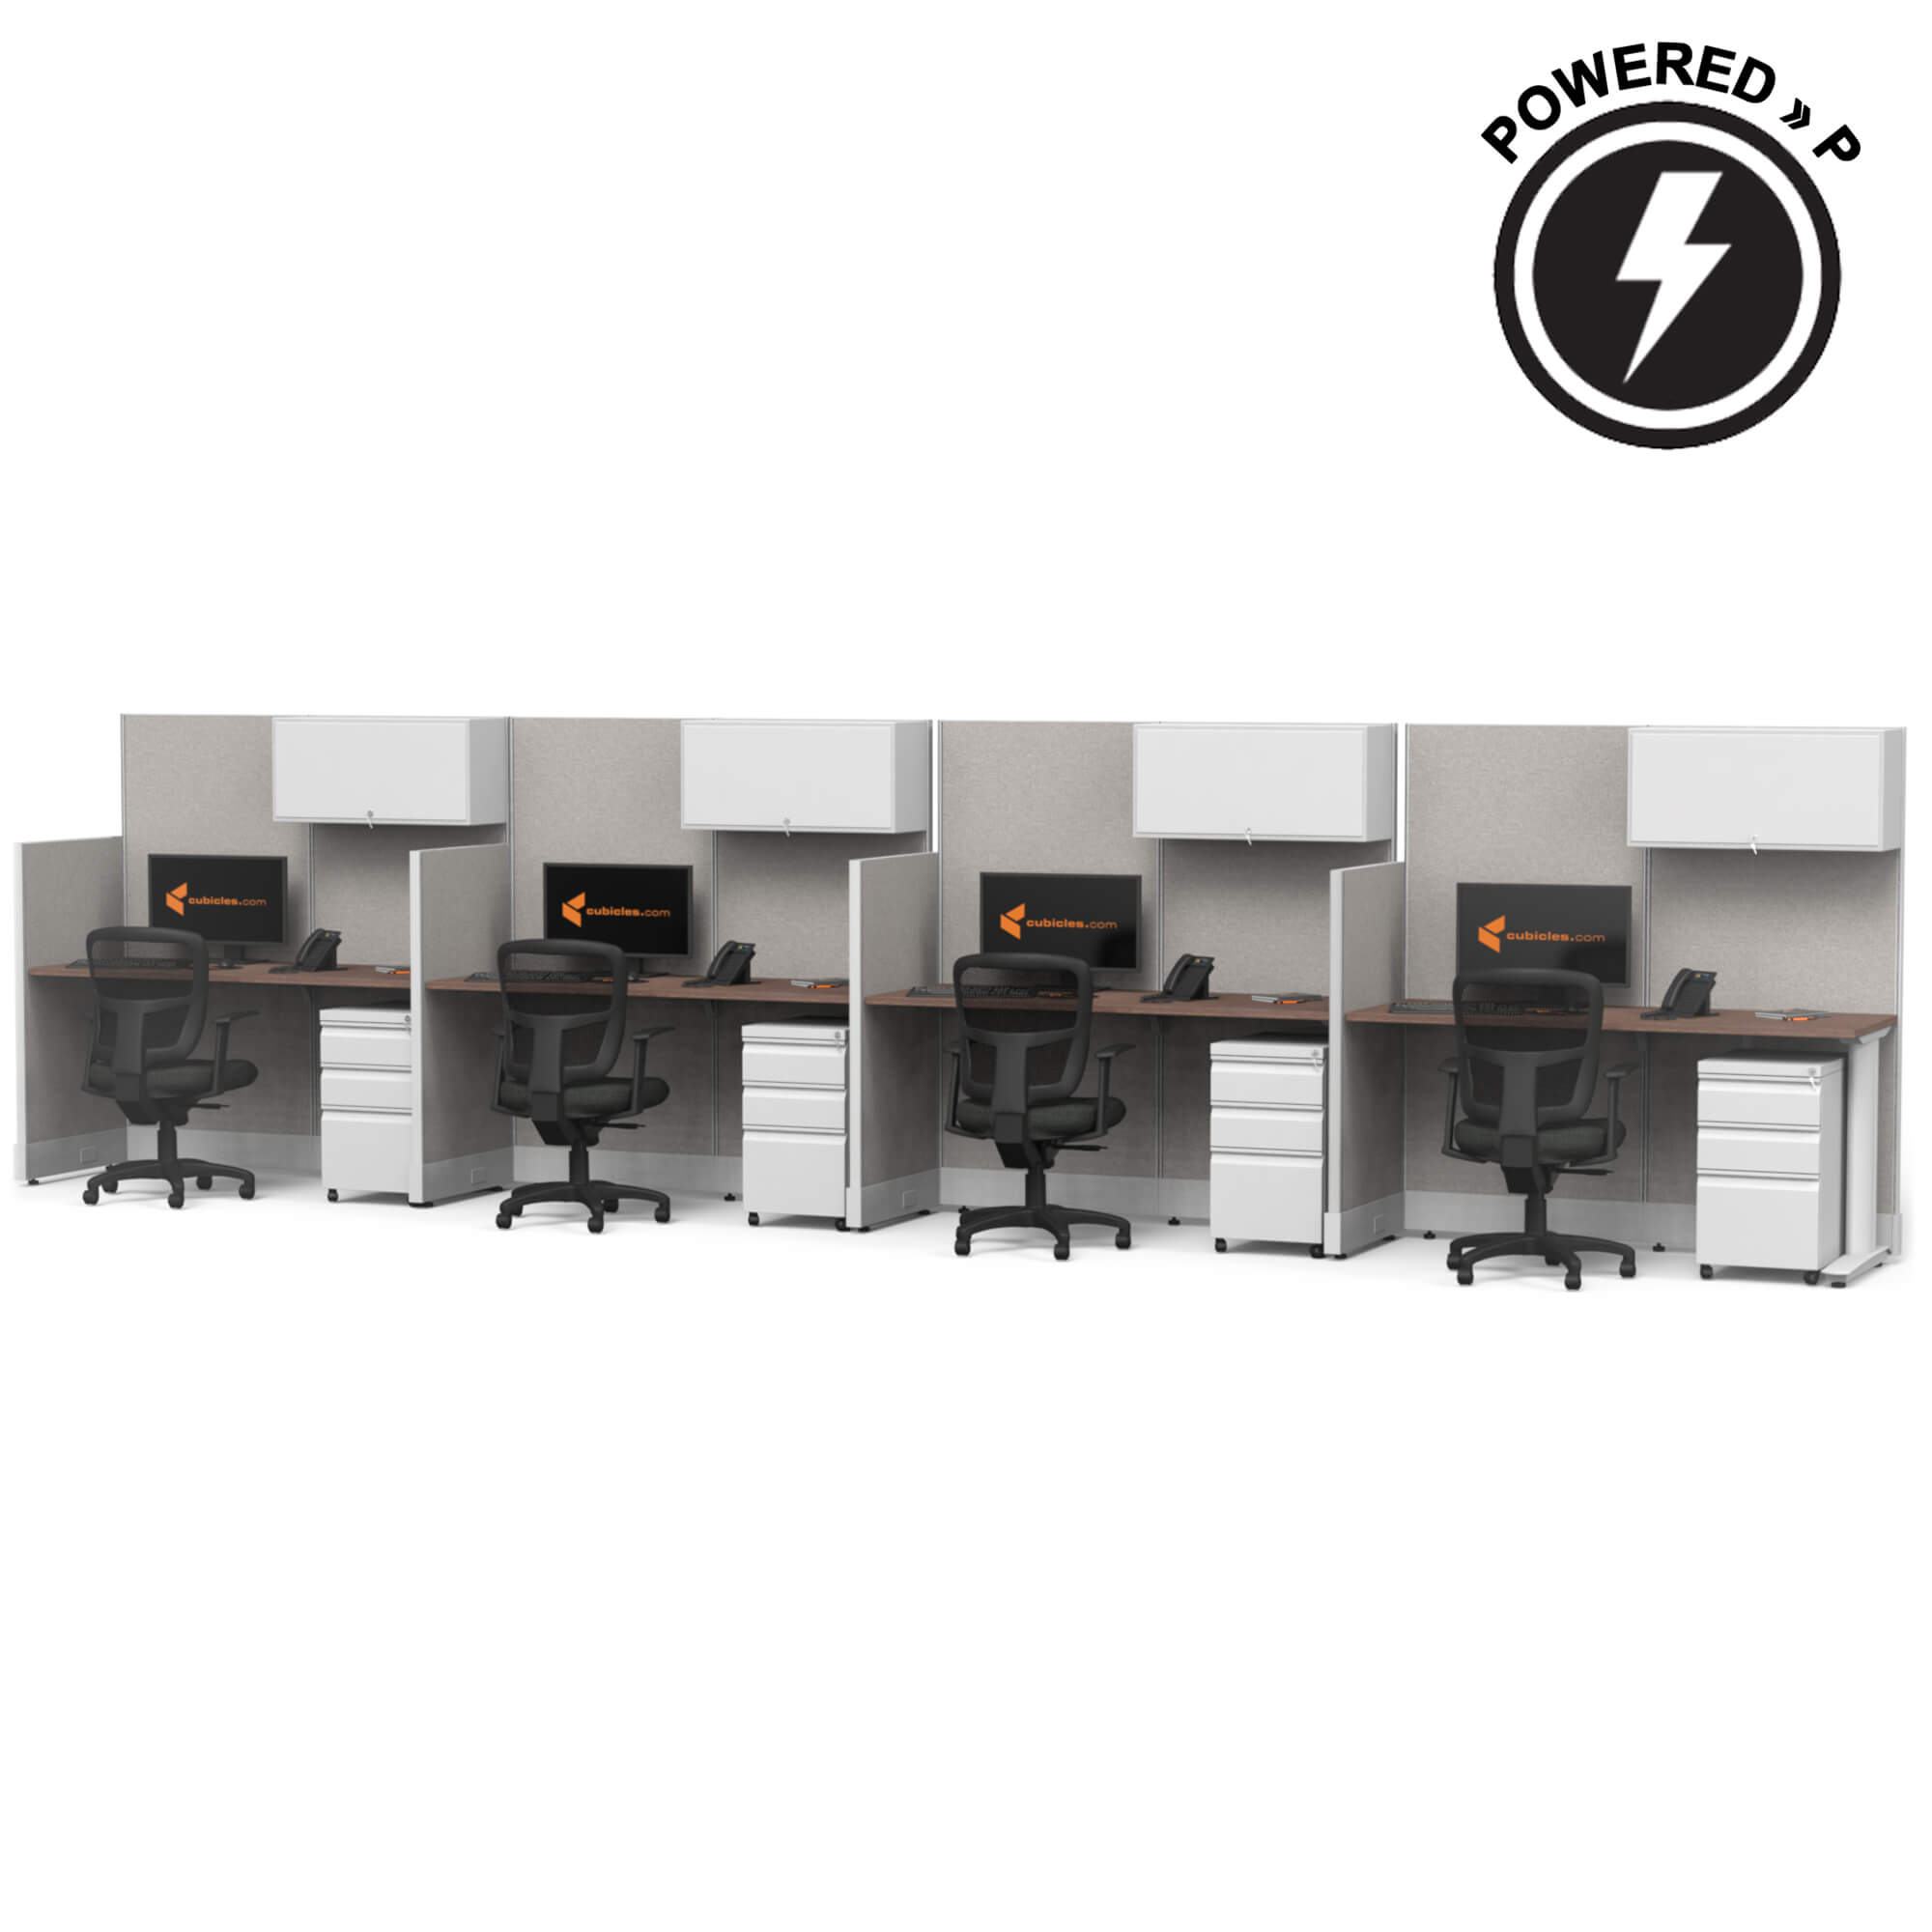 cubicle-desks-straight-workstation-4pack-inline-powered-with-storage-sign.jpg